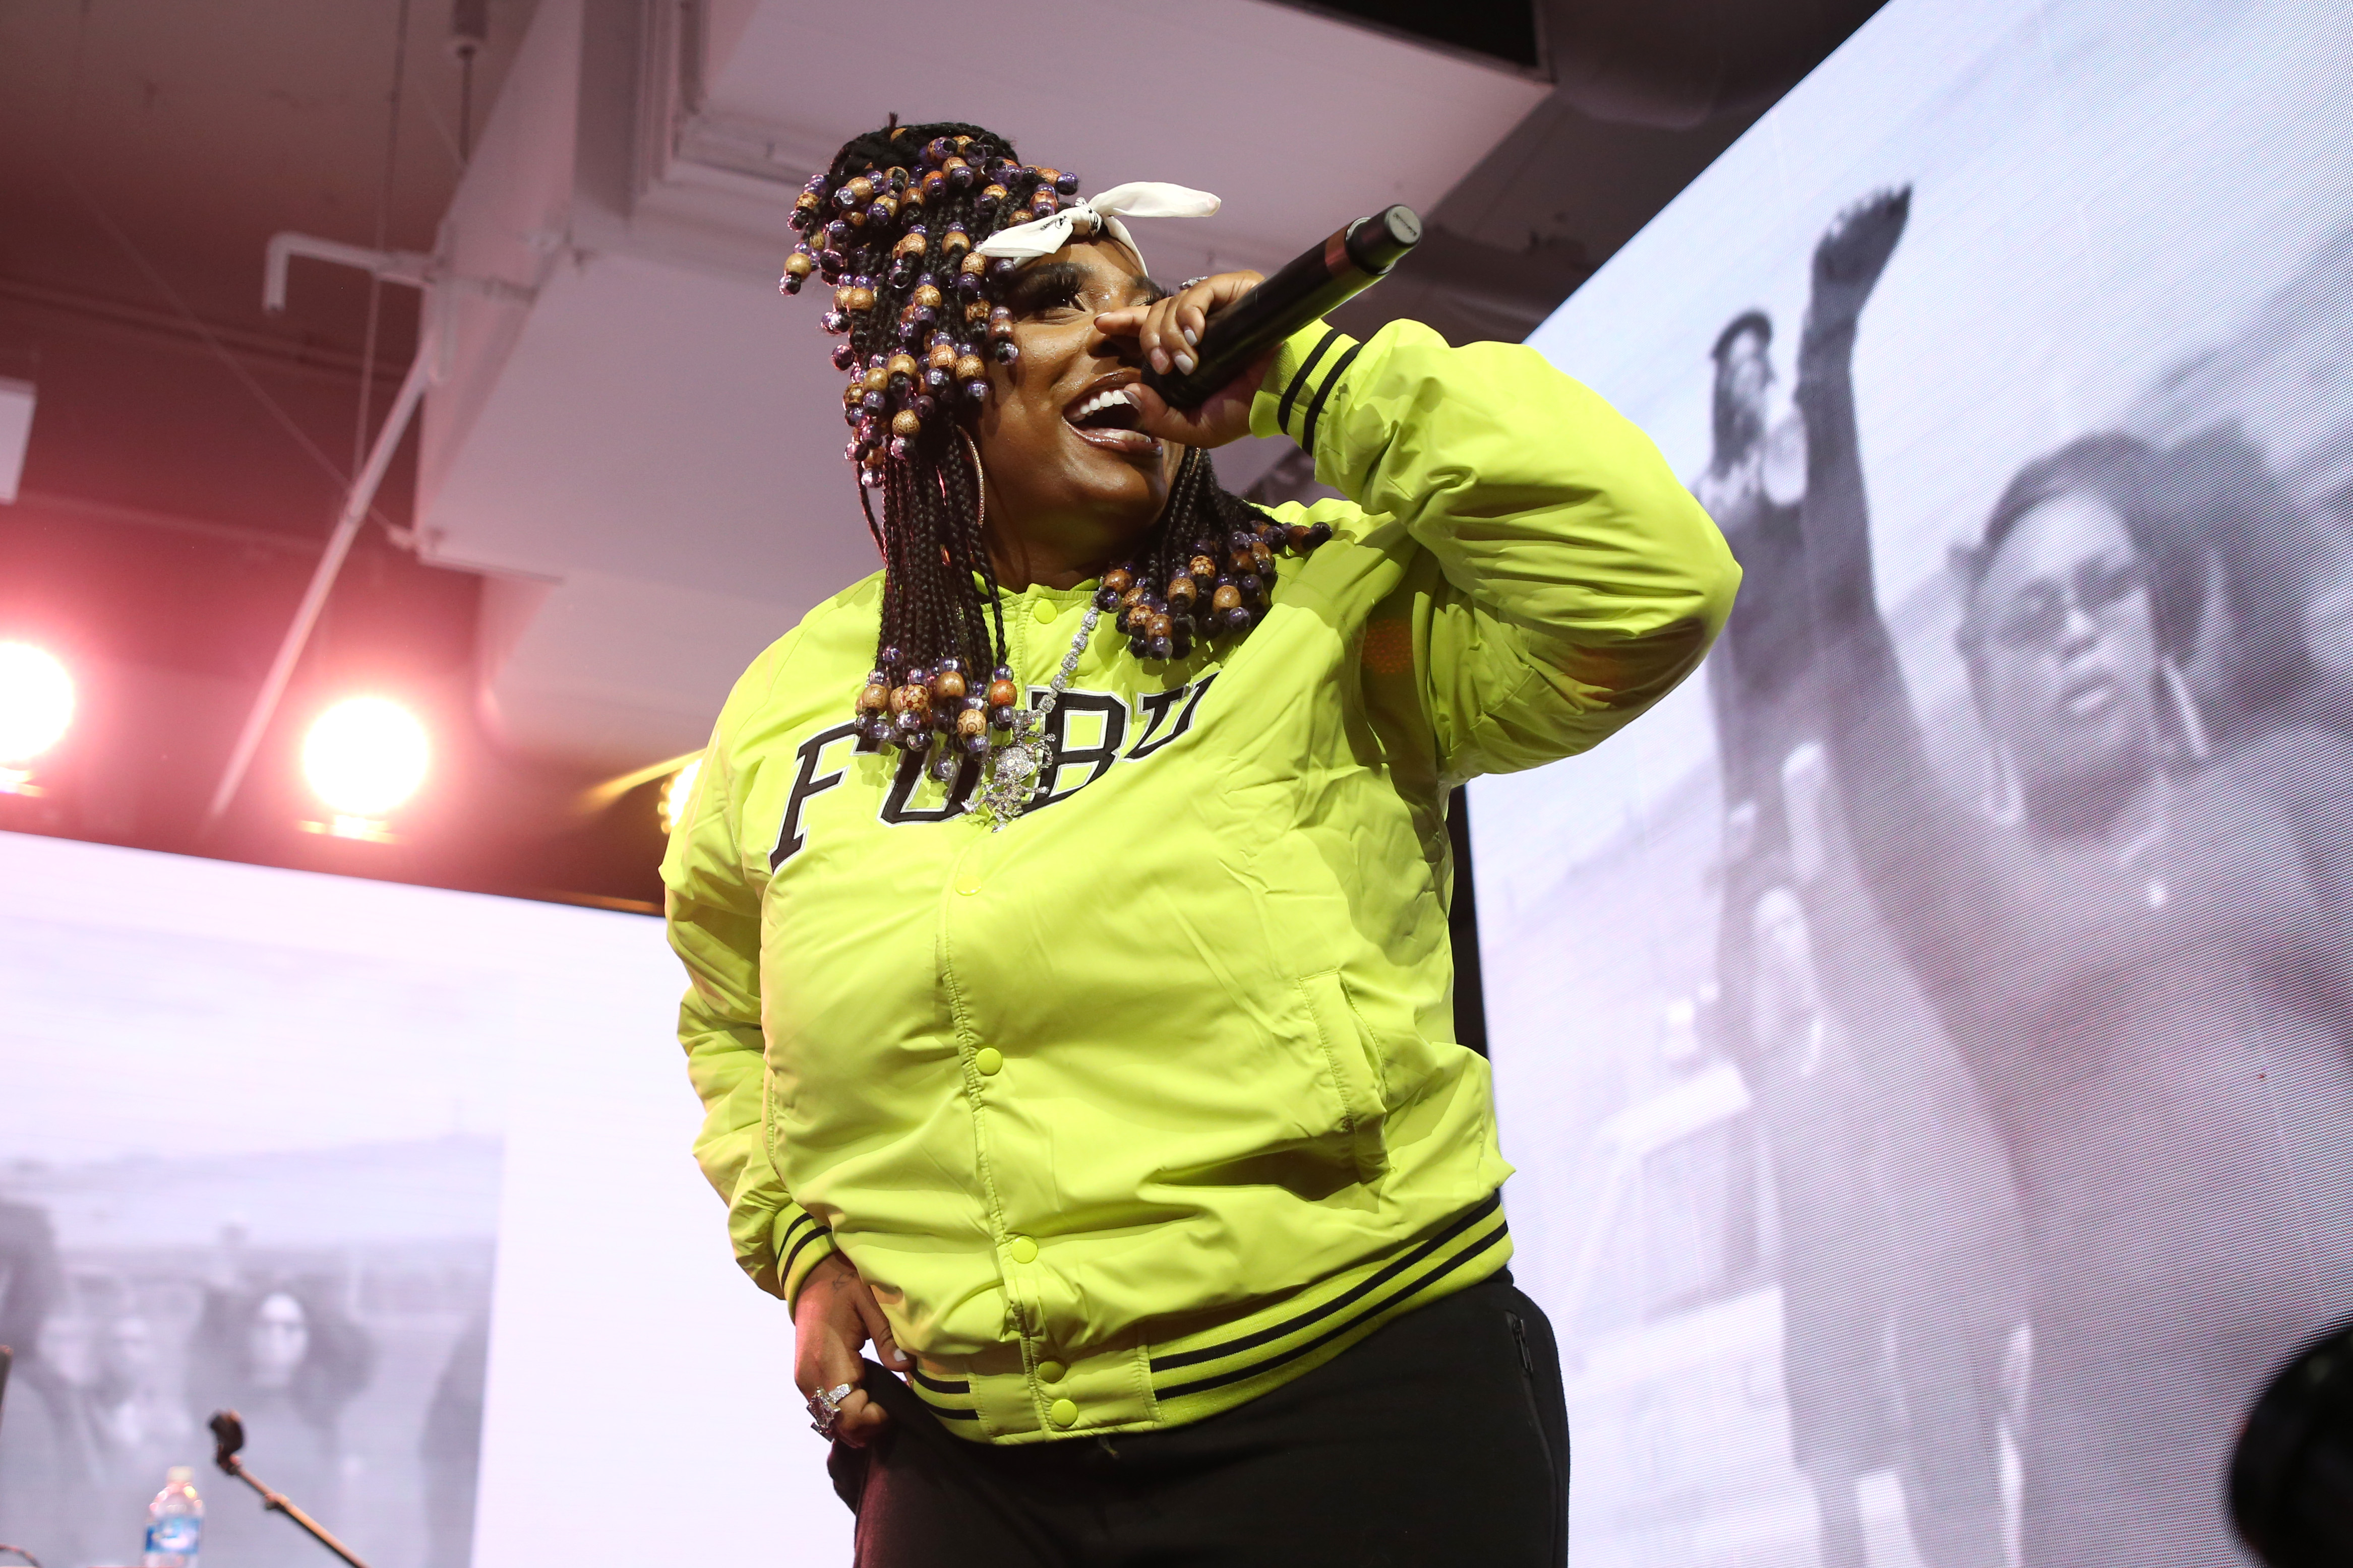 Kamaiyah Reacts To Recent Arrest, Says She Didn’t Have A Warrant